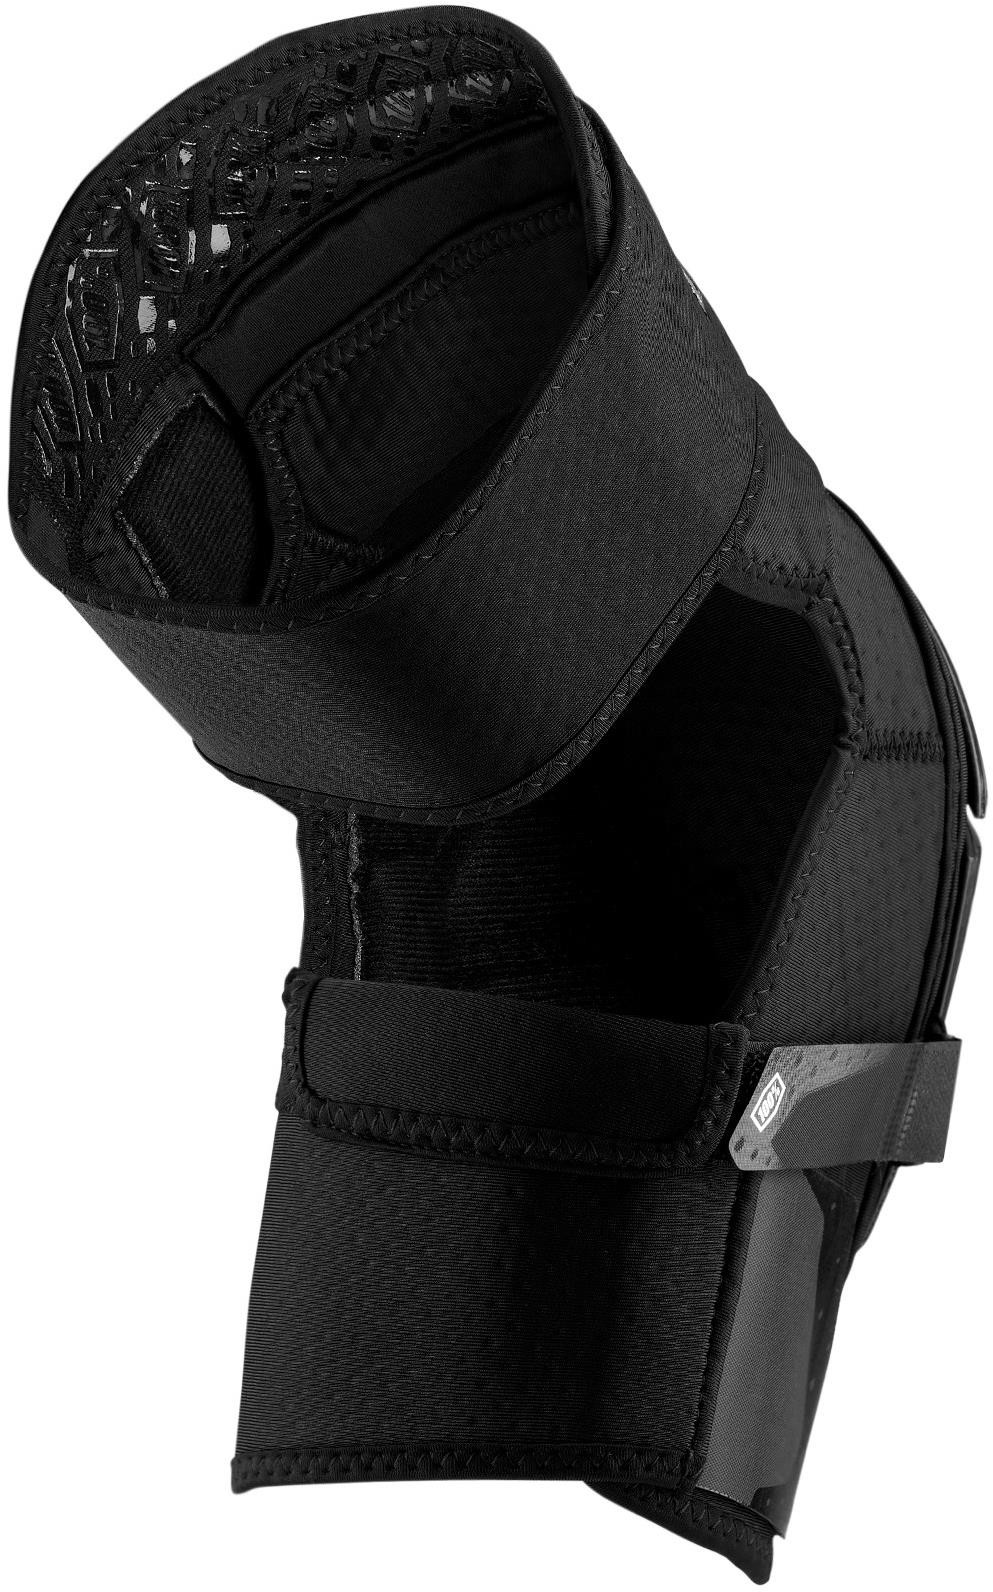 Fortis MTB Cycling Knee Guards image 1